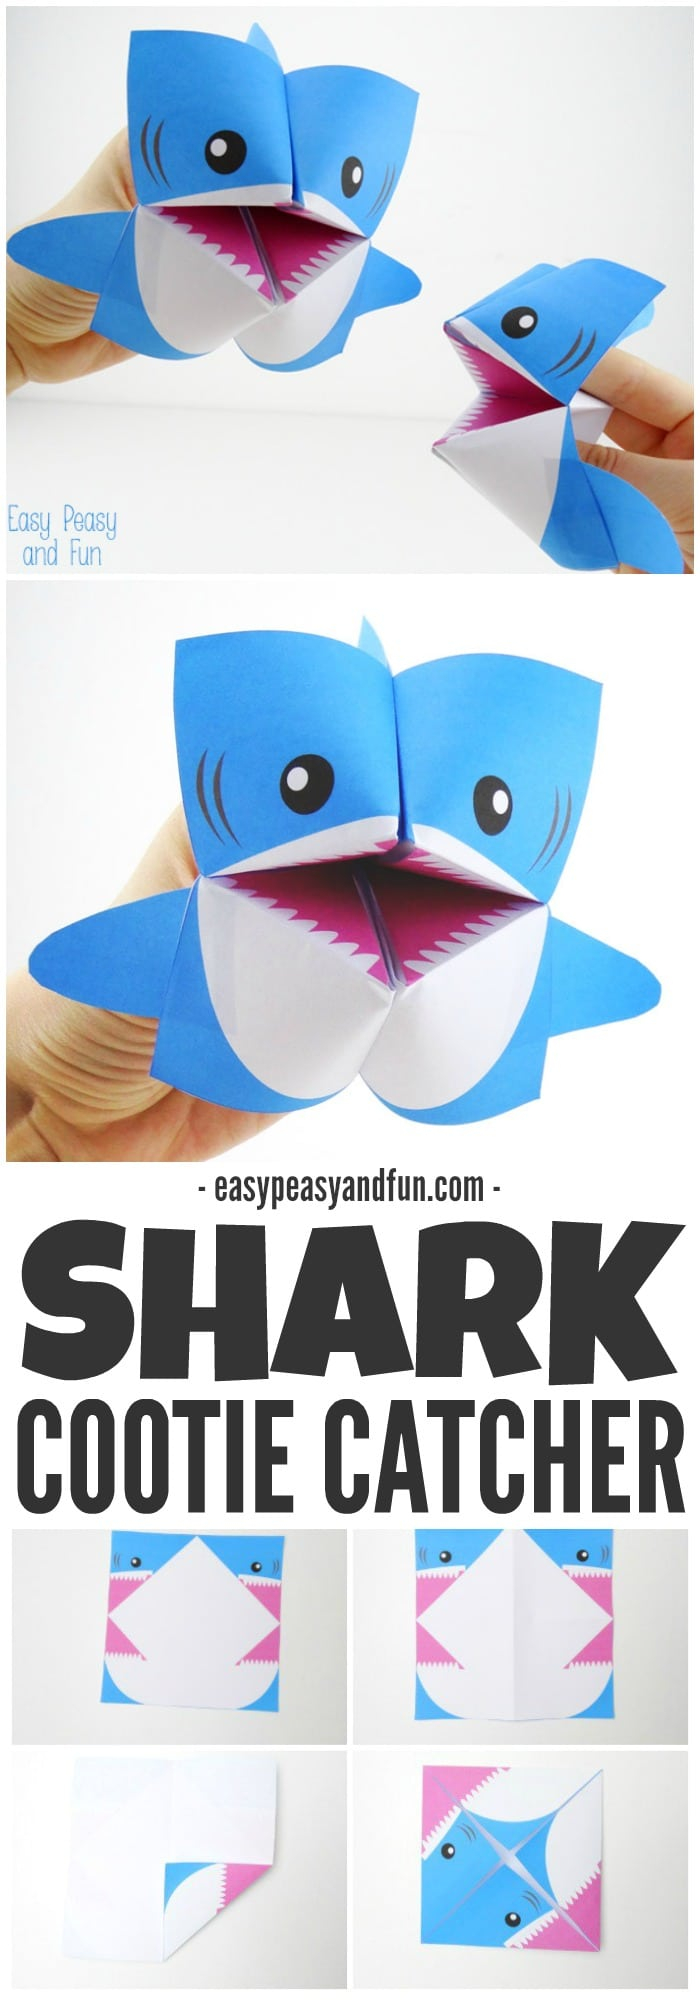 How To Make An Origami Shark Shark Cootie Catcher Origami For Kids Easy Peasy And Fun